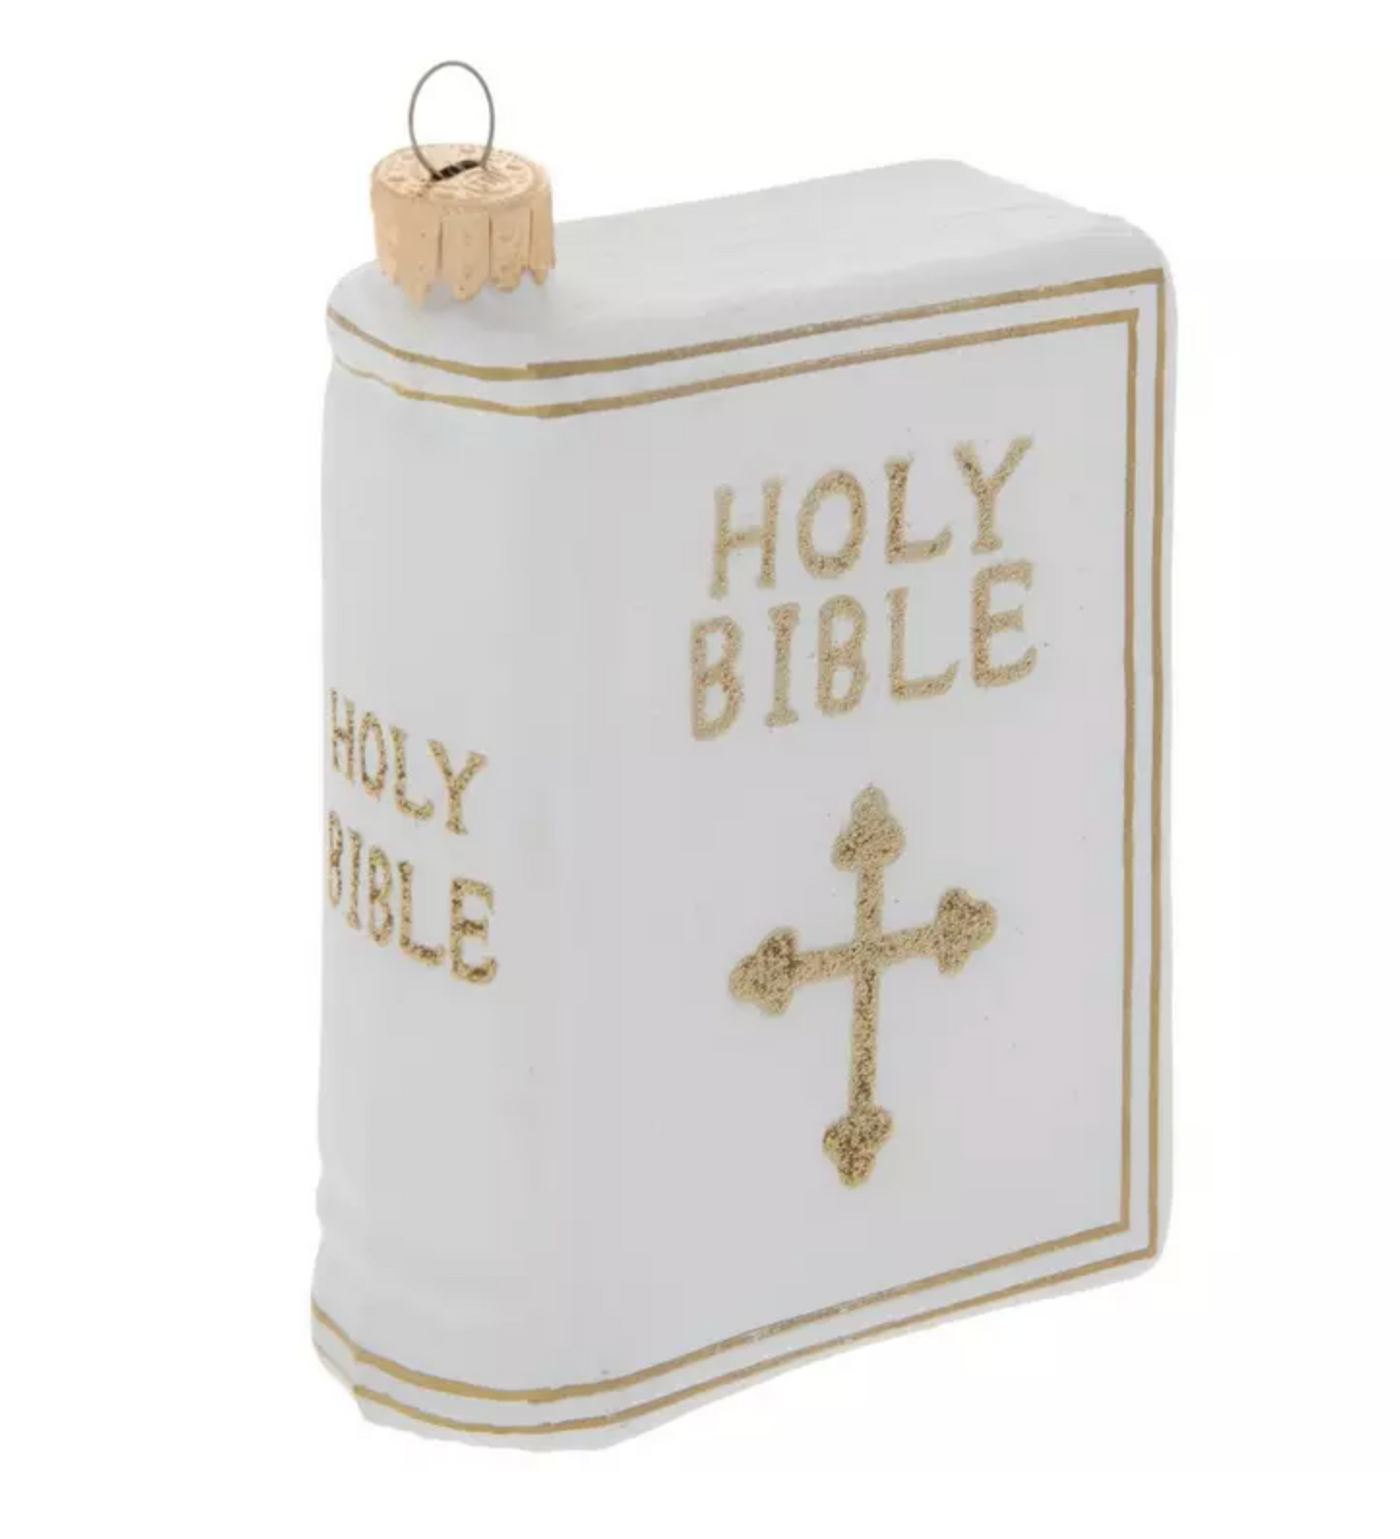 Robert Stanley White Holy Bible Glass Christmas Ornament New with Tag